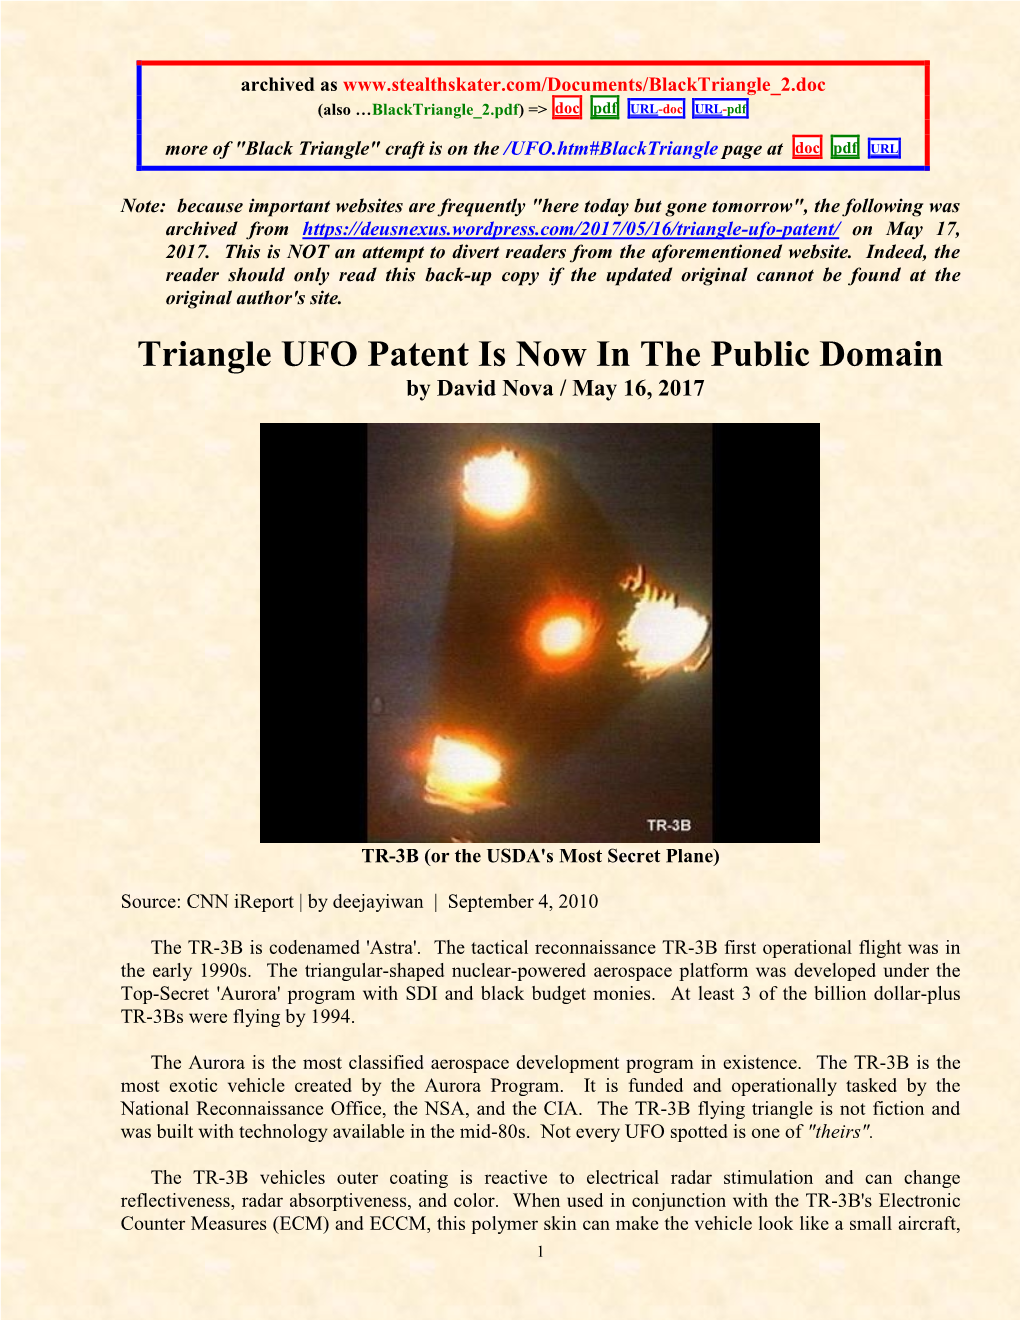 Triangle UFO Patent Is Now in the Public Domain by David Nova / May 16, 2017